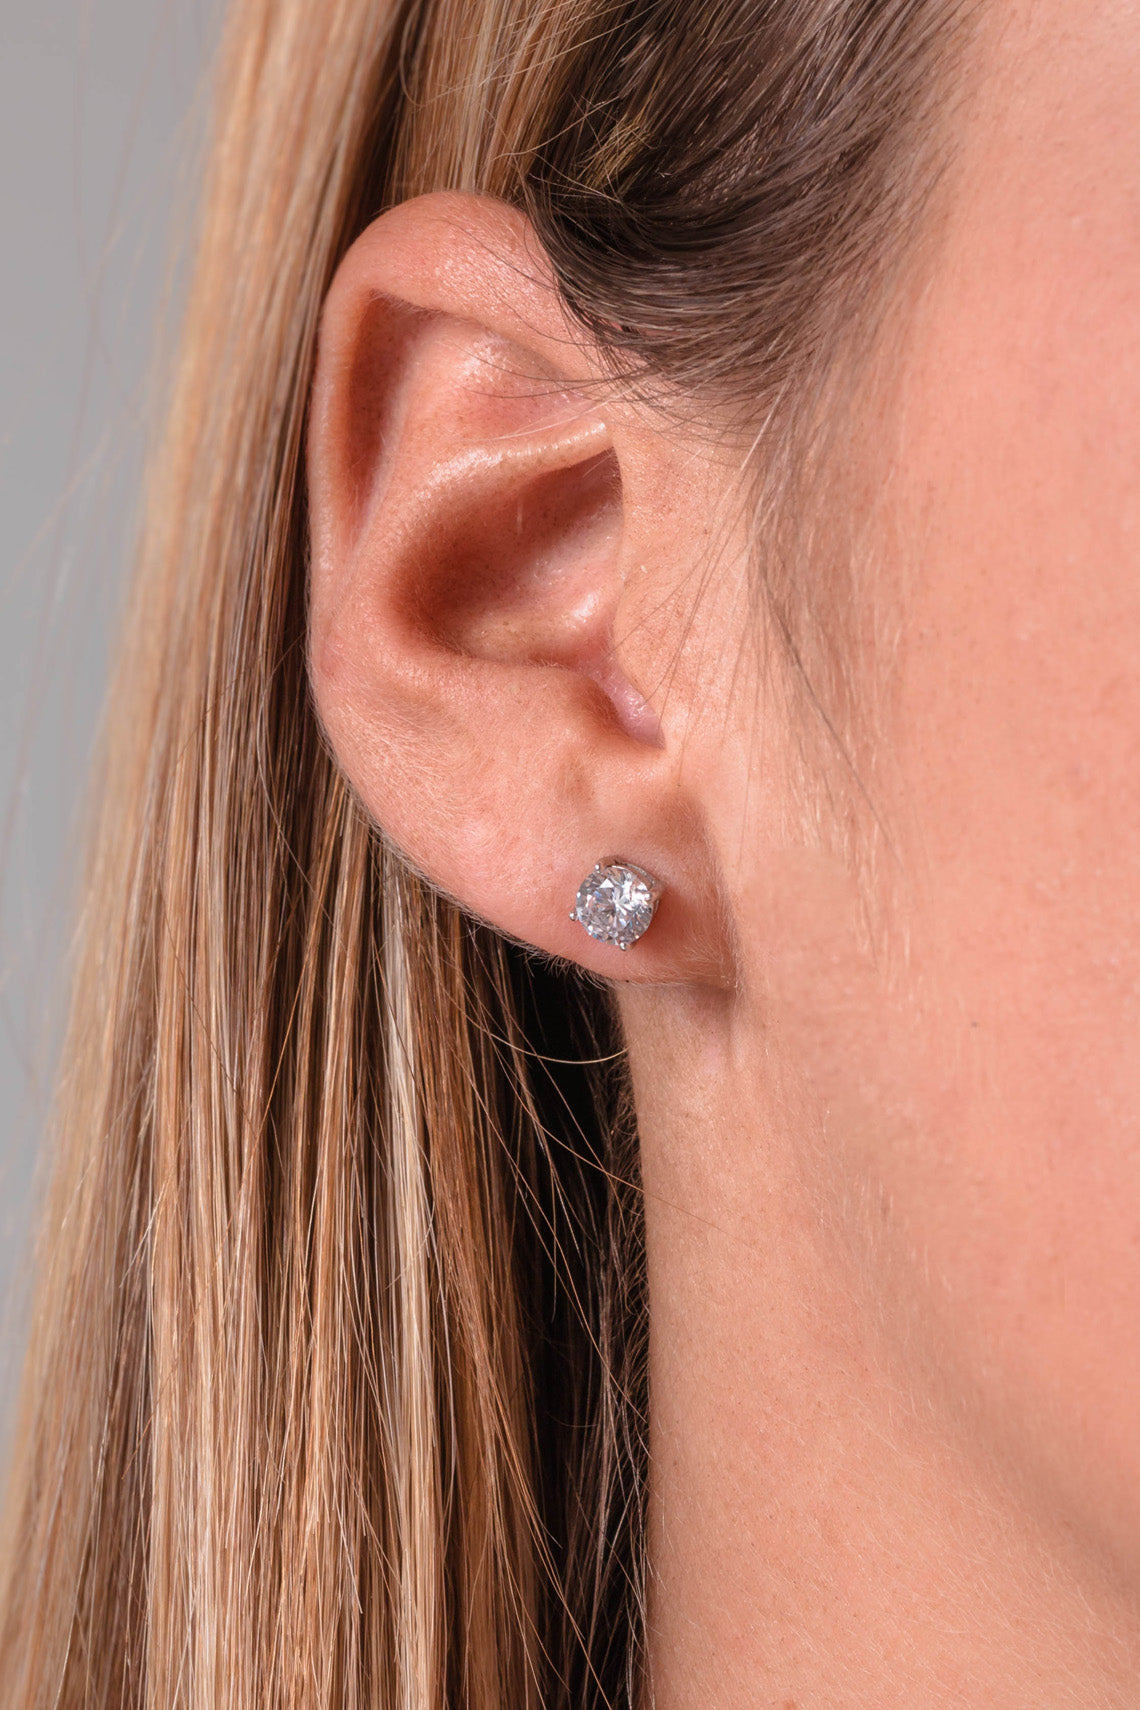 CLEAR ROUND STUD 5MM